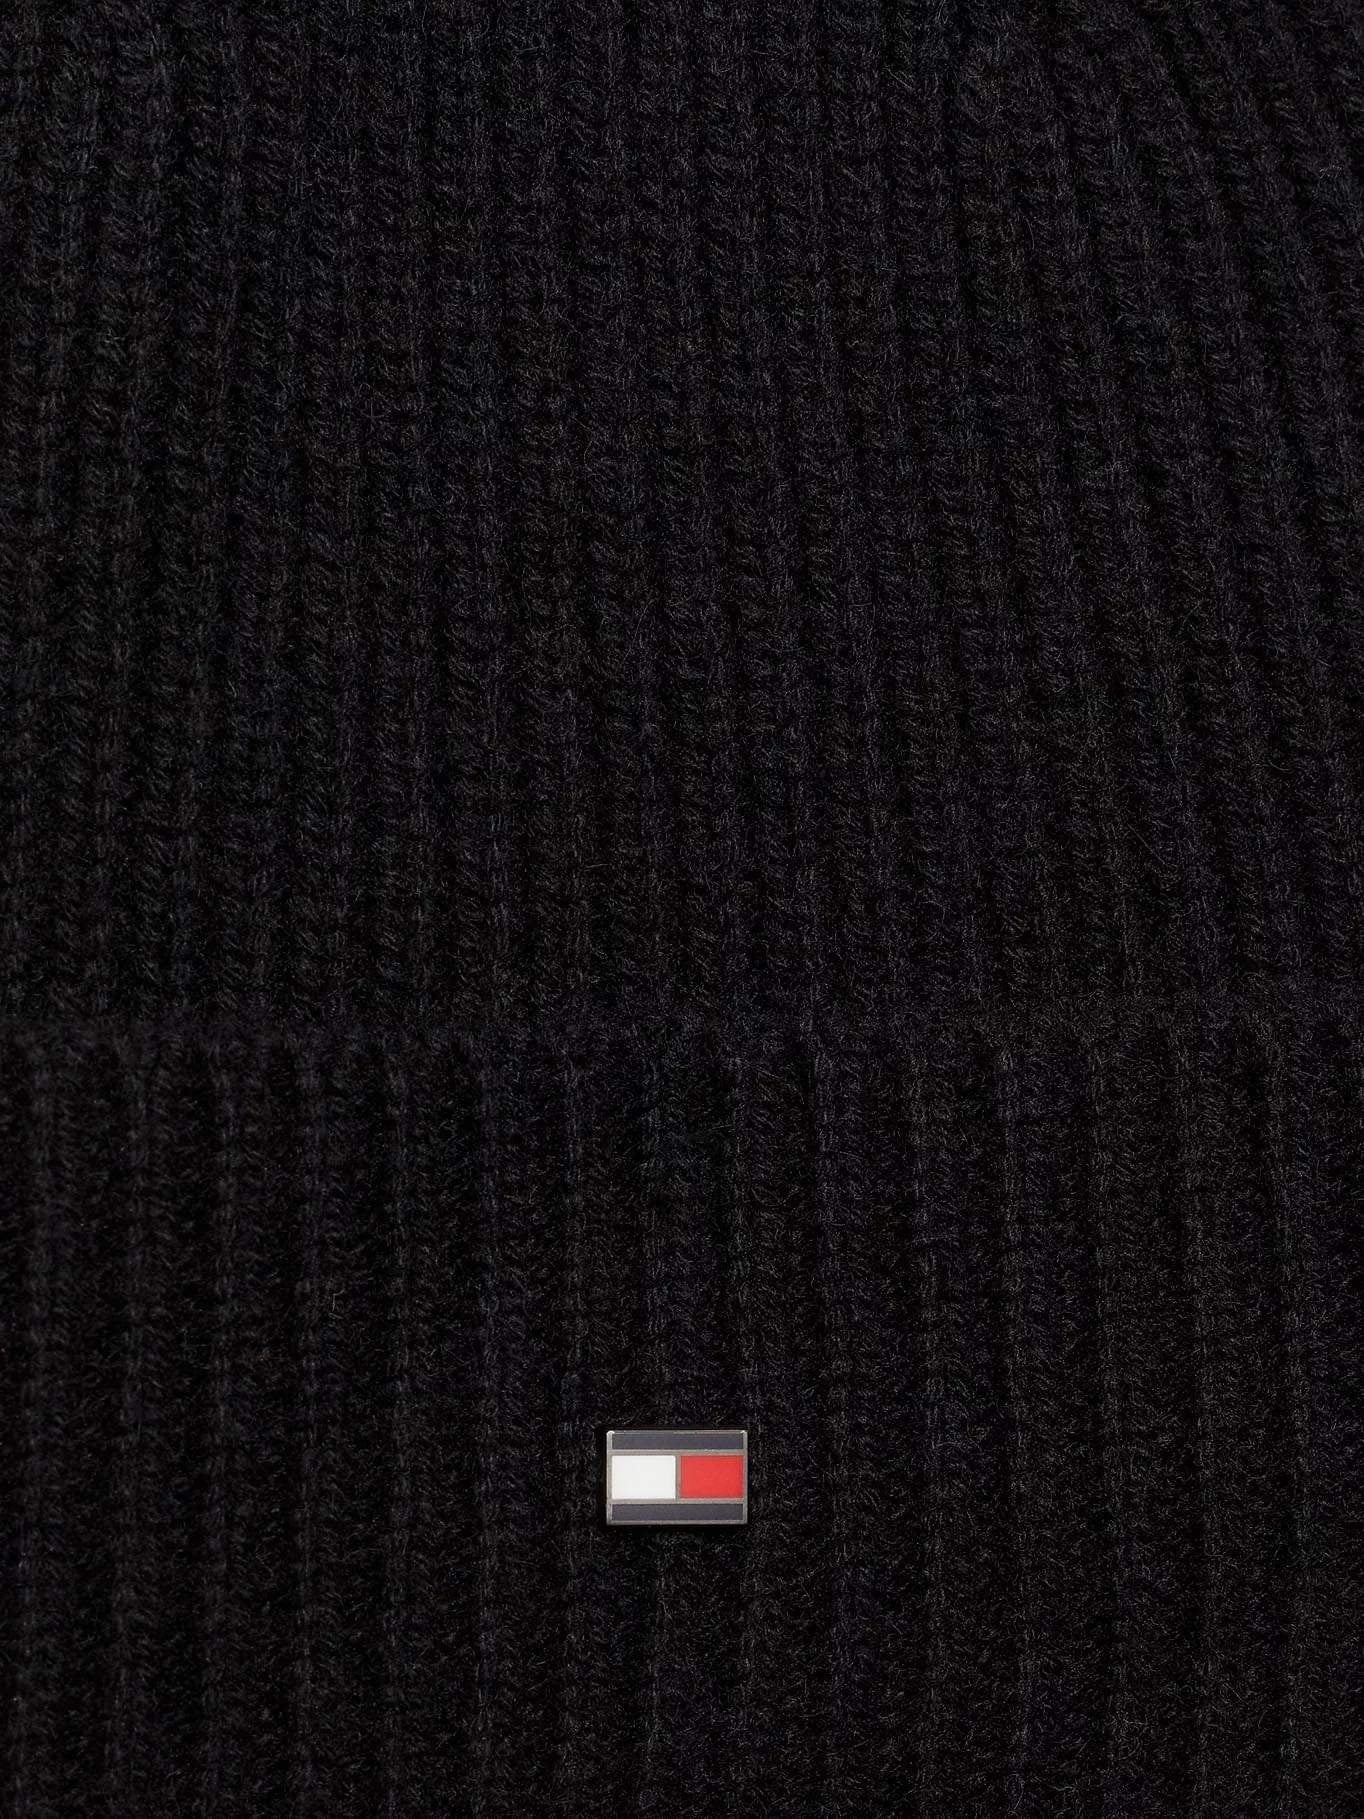 TH Cashmere elevated plaque beanie